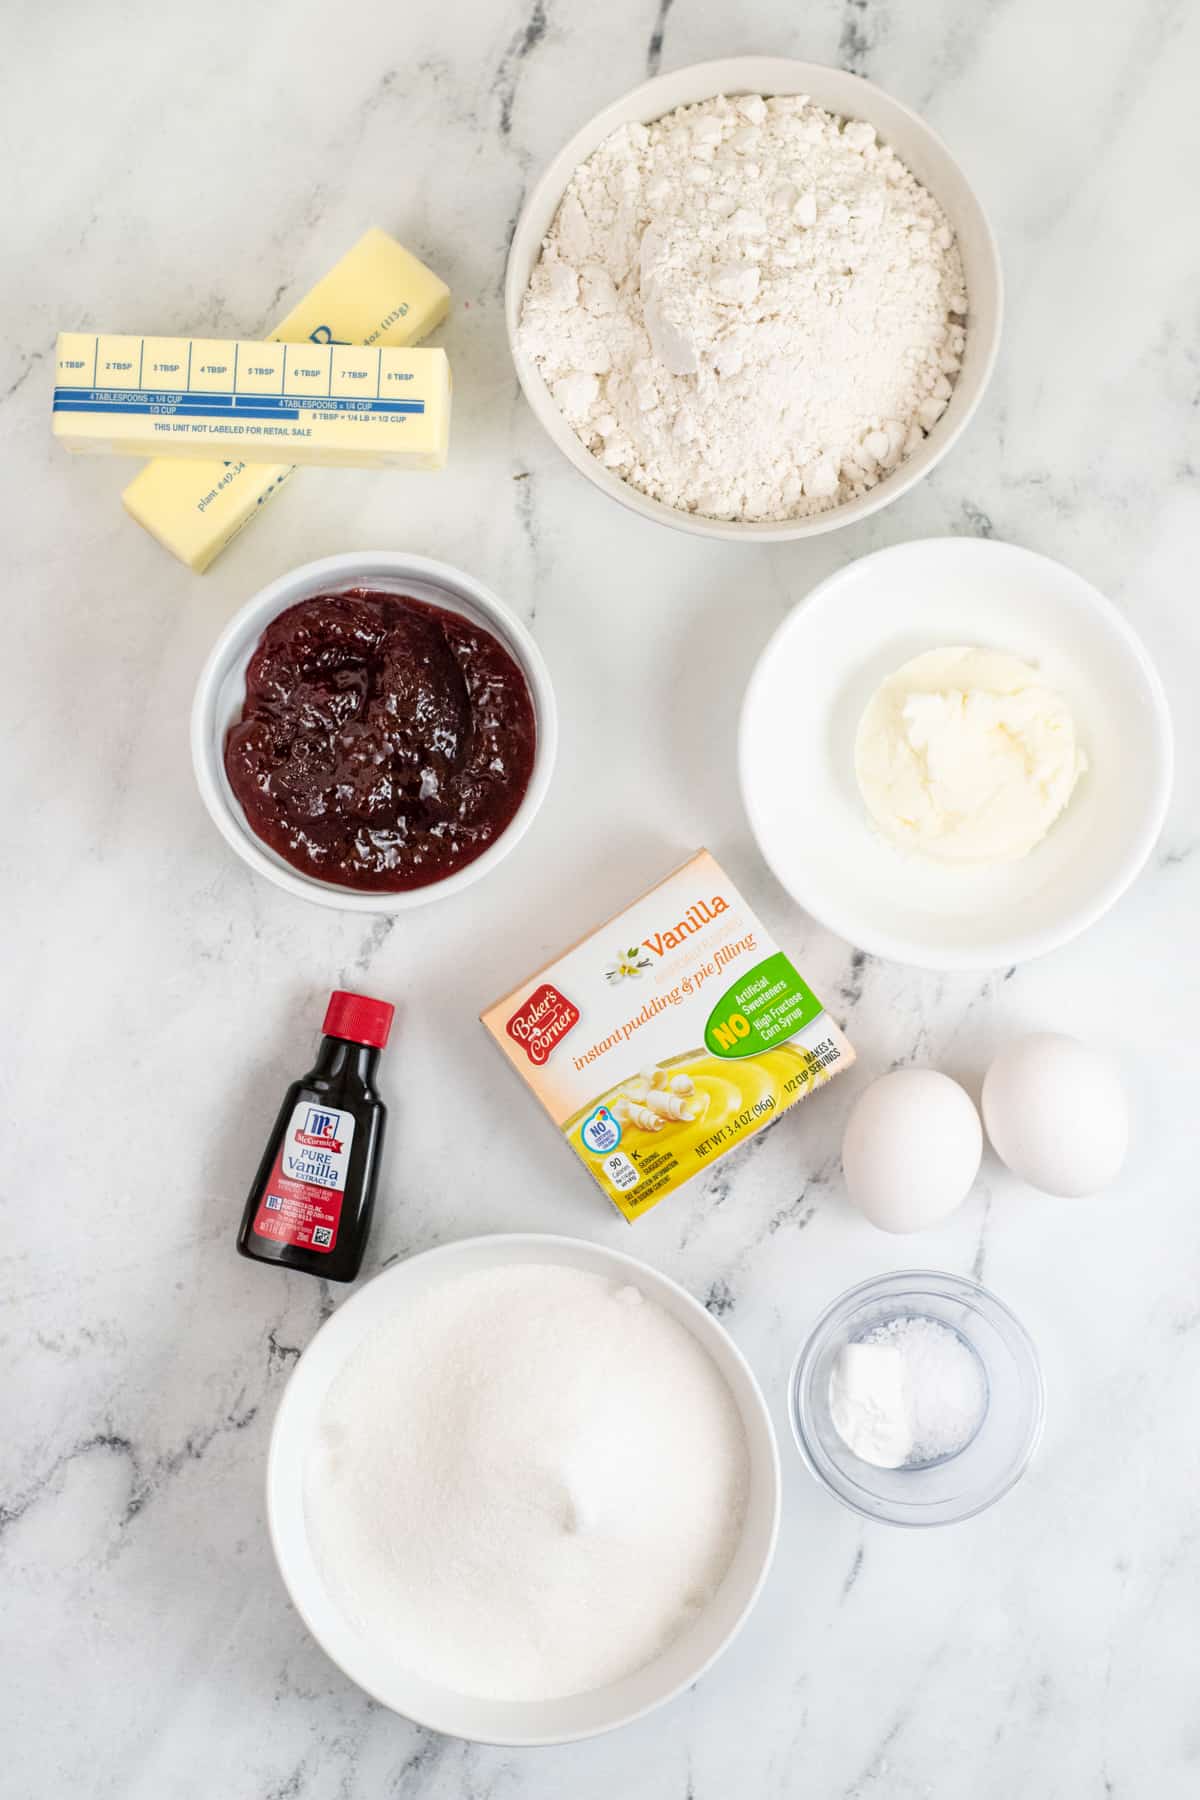 Ingredients on countertop: two sticks of butter, bowl of flour, bowl of shortening, 2 eggs, box of vanilla pudding mix, salt, baking powder, granulated sugar, bowl of strawberry jam